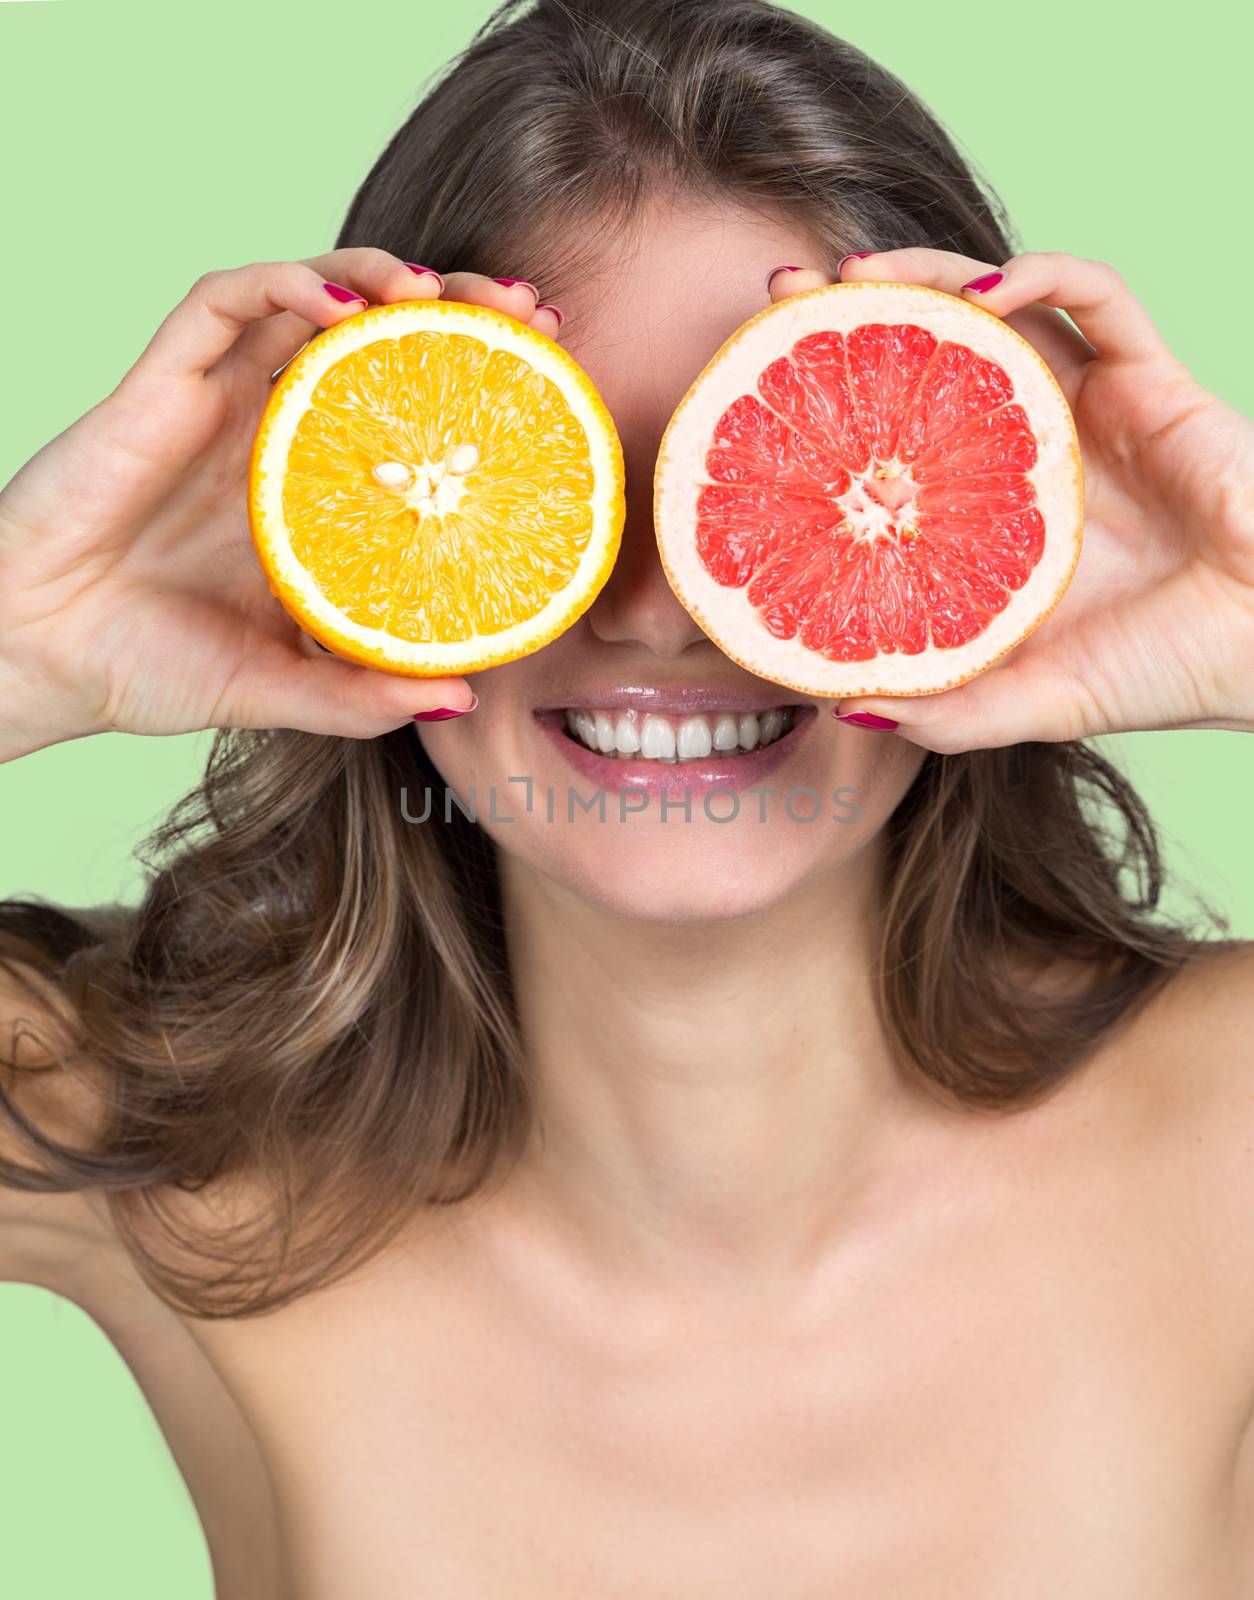 Smiling woman holding slices of orange and grapefruit in front of her eyes